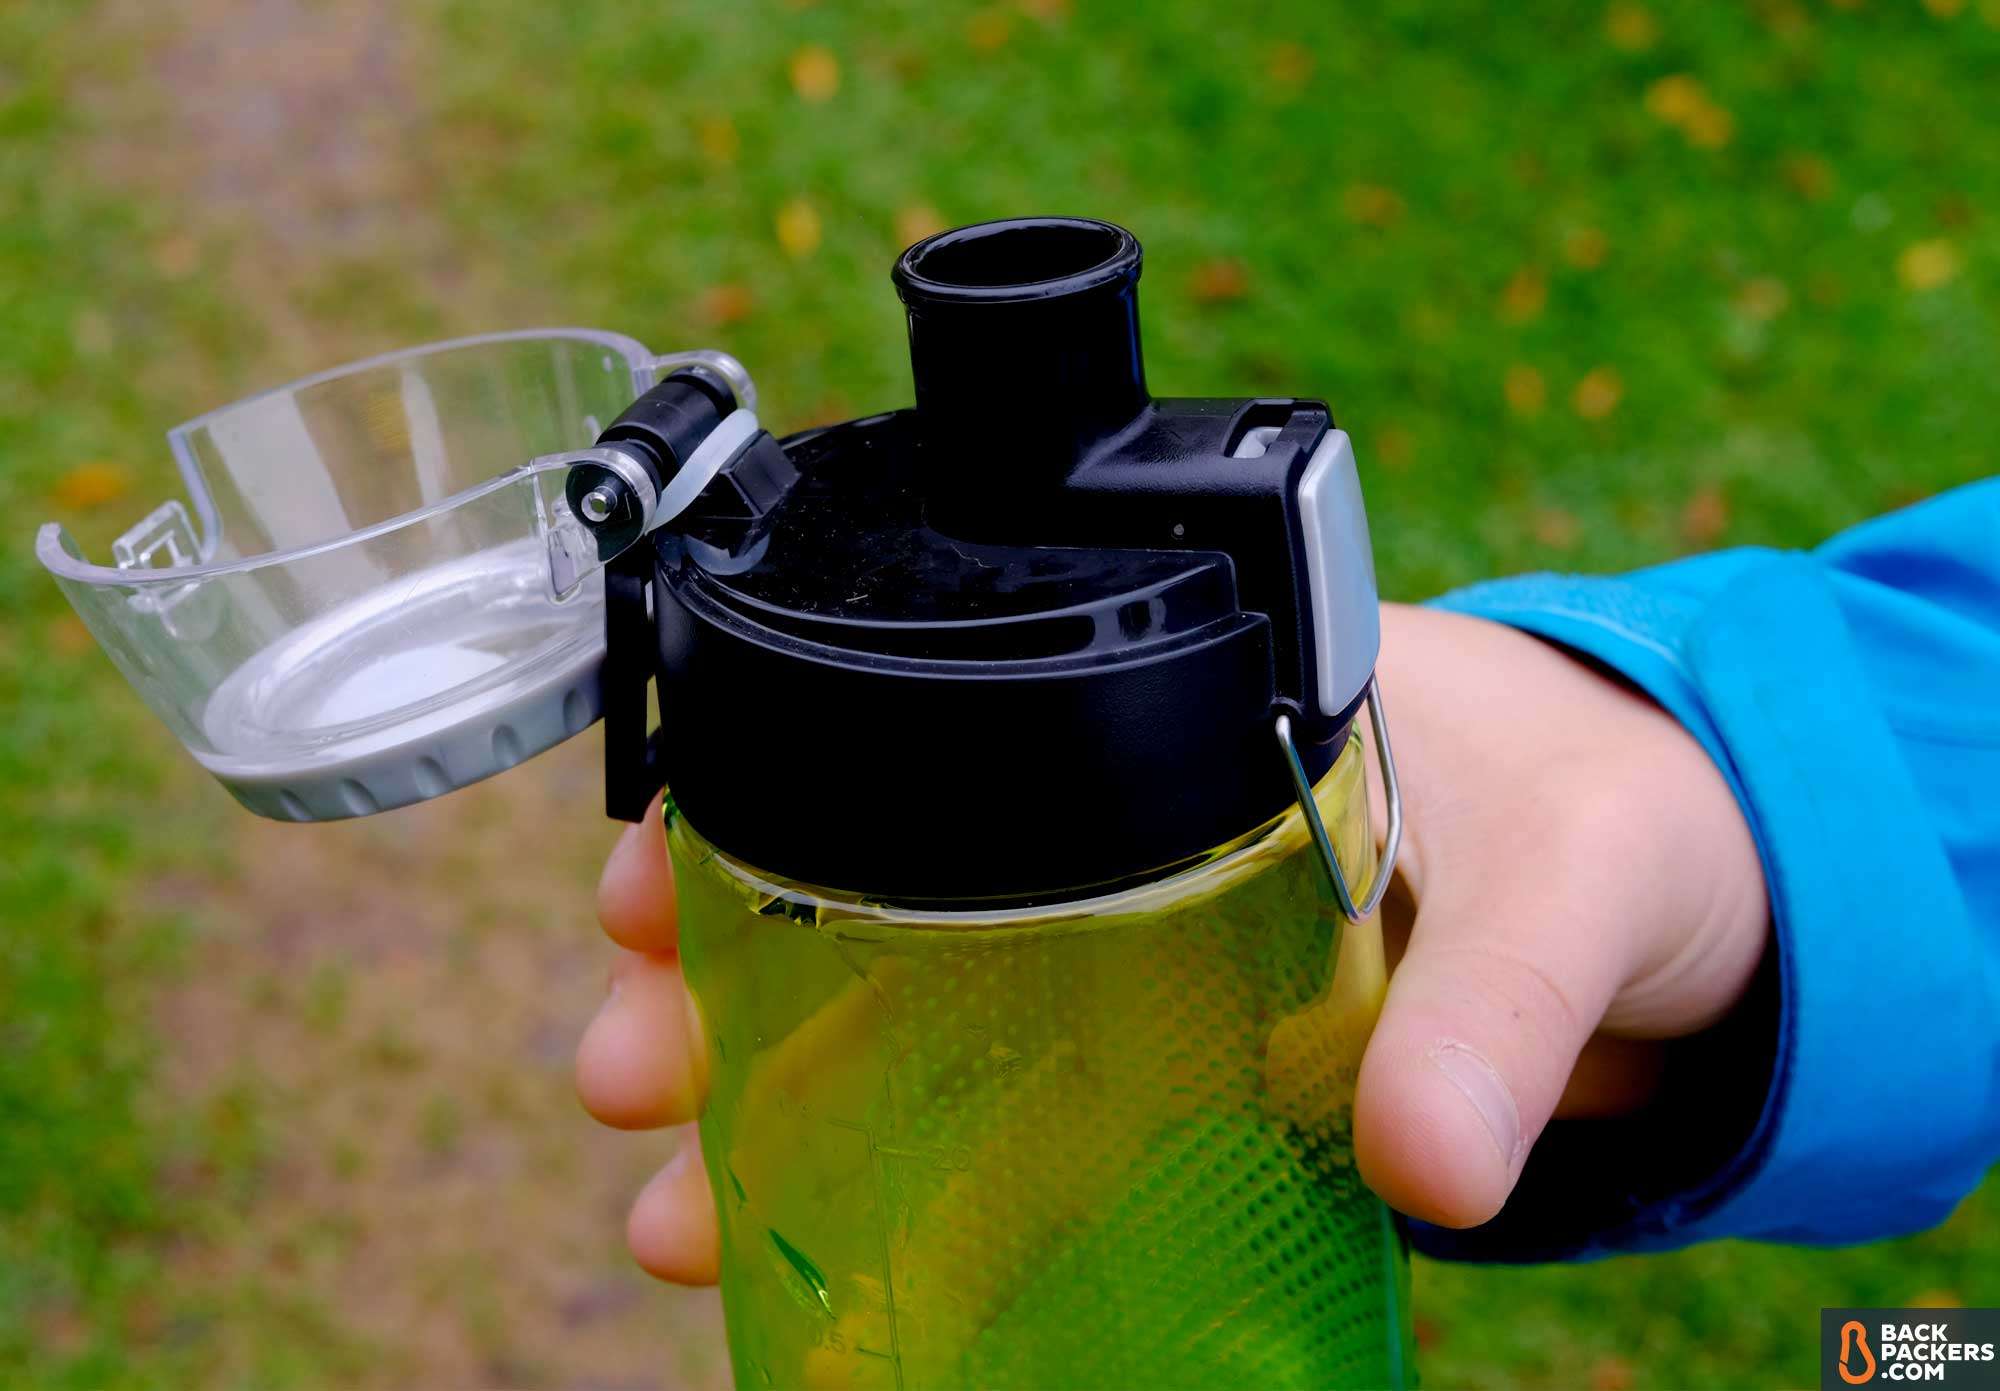 thermos water bottle lid